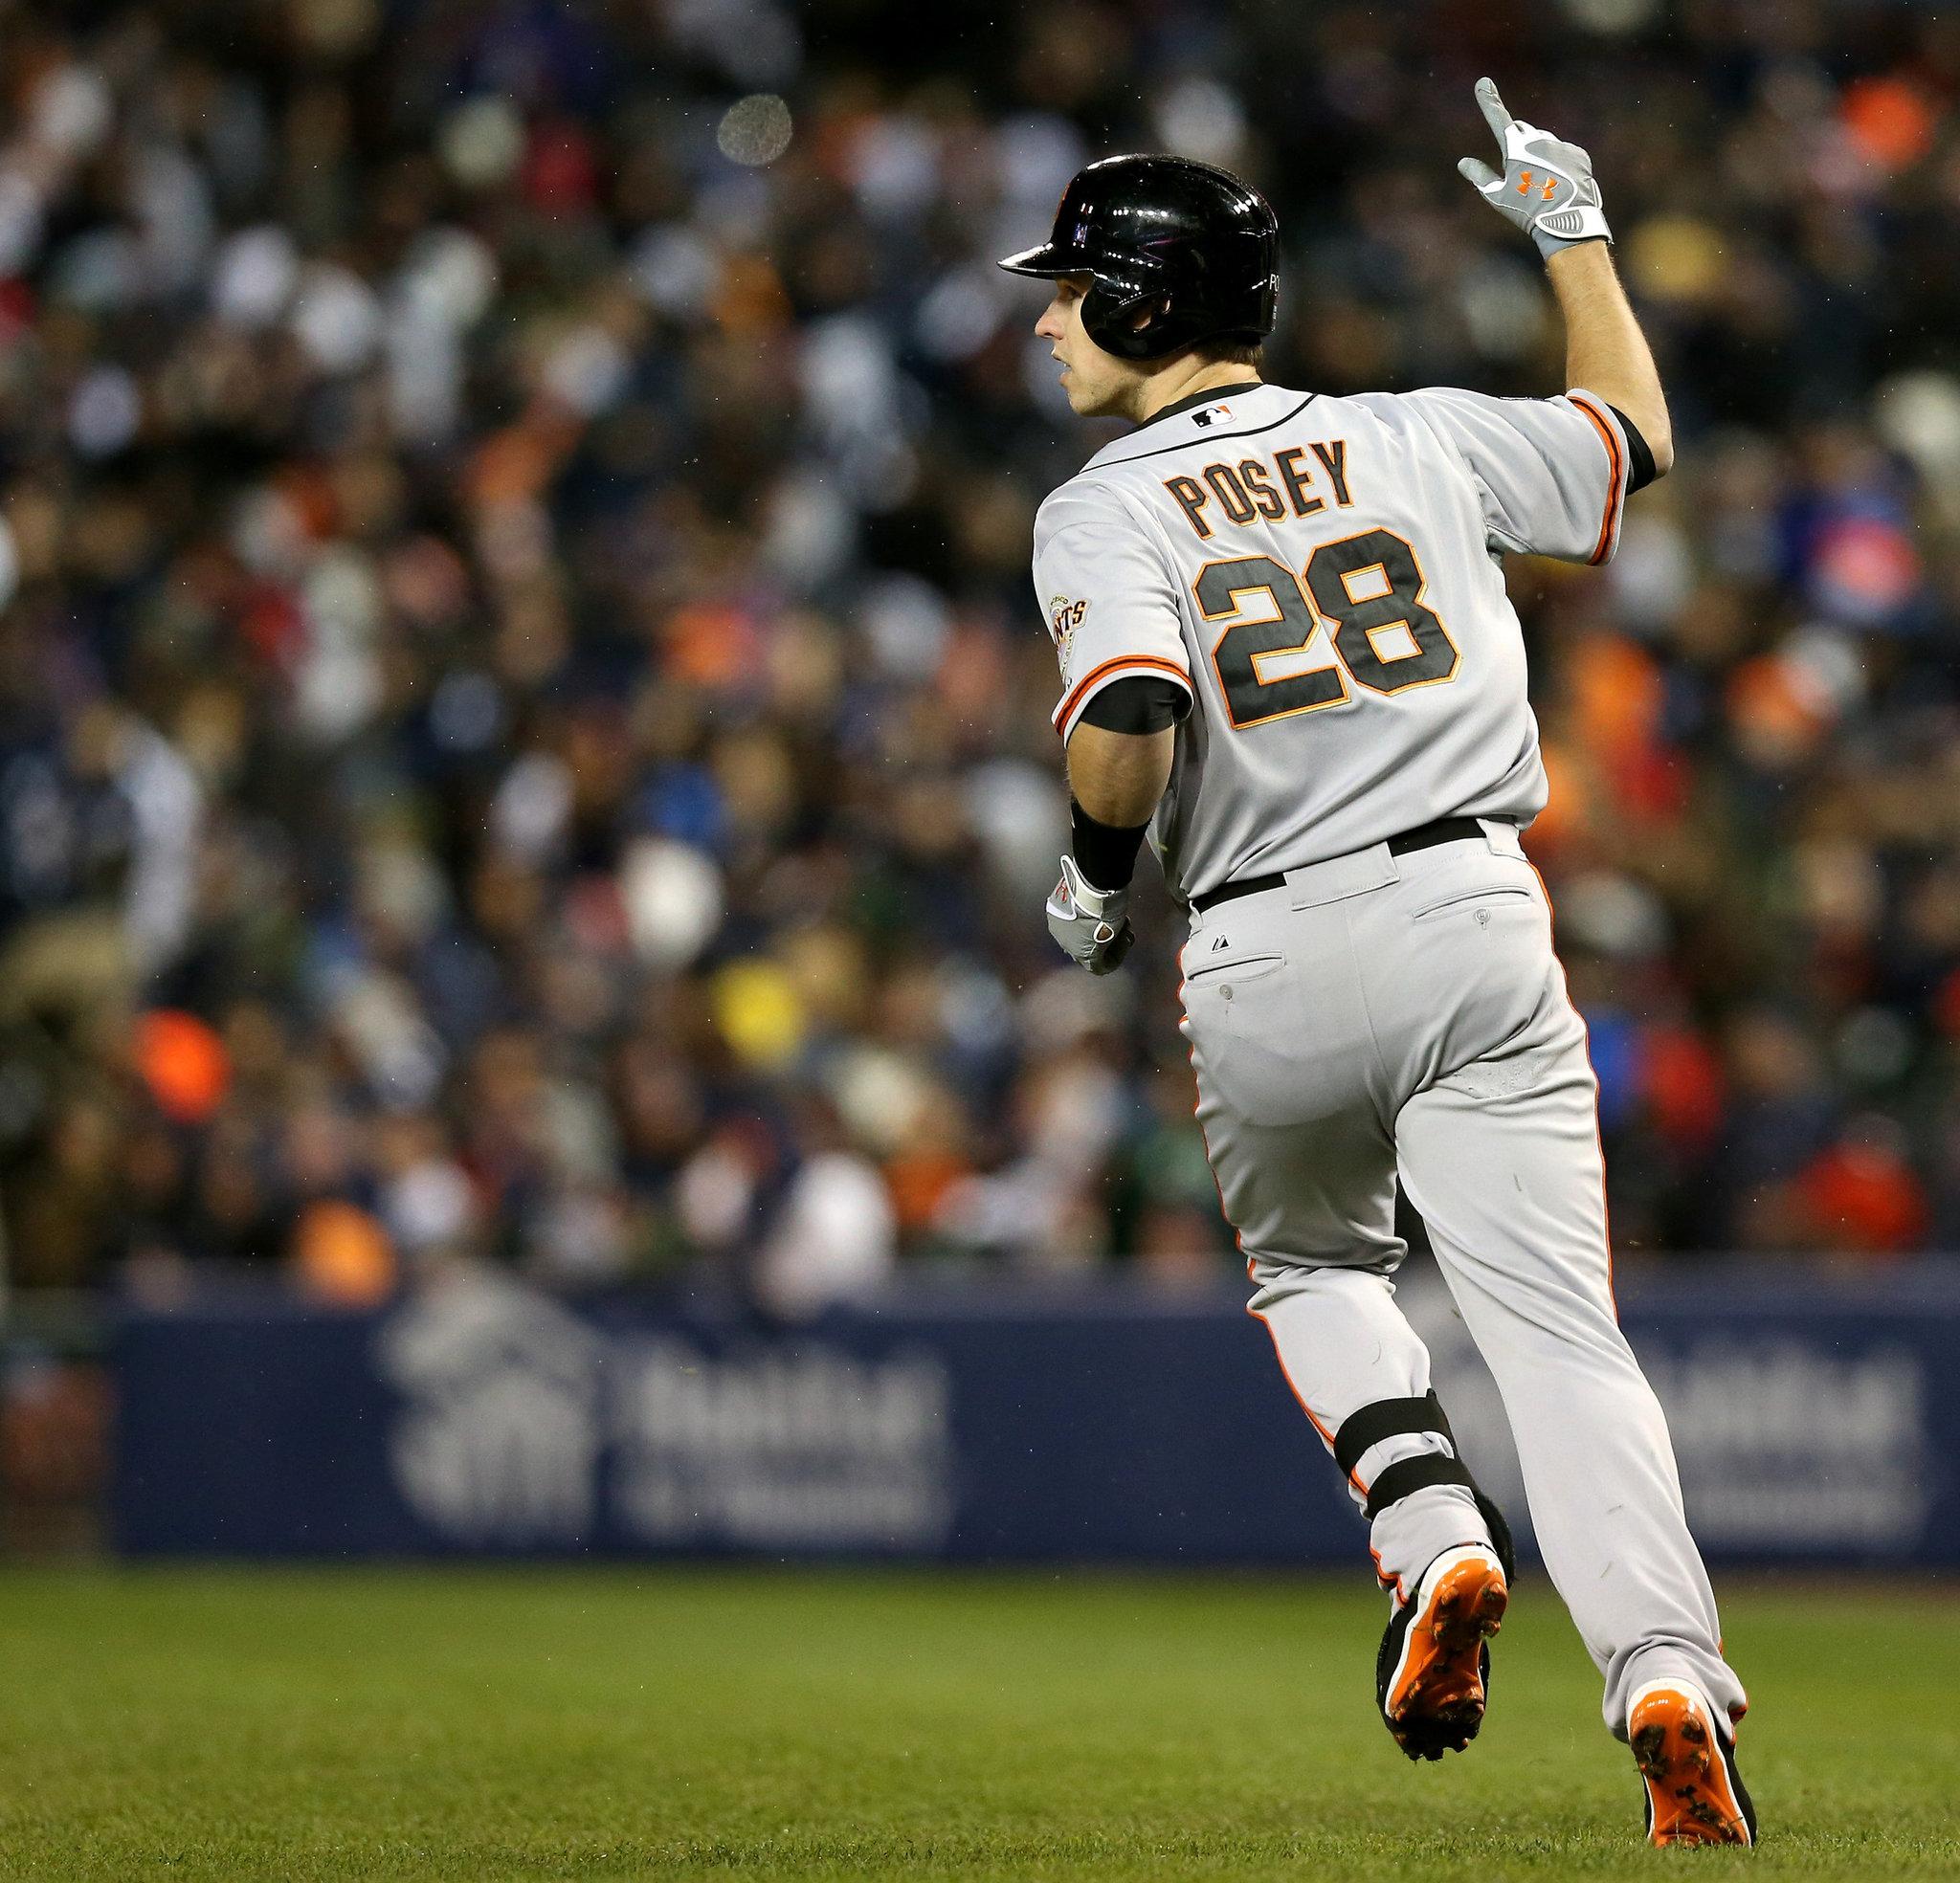 Giants' Posey Is the Champions' Champion